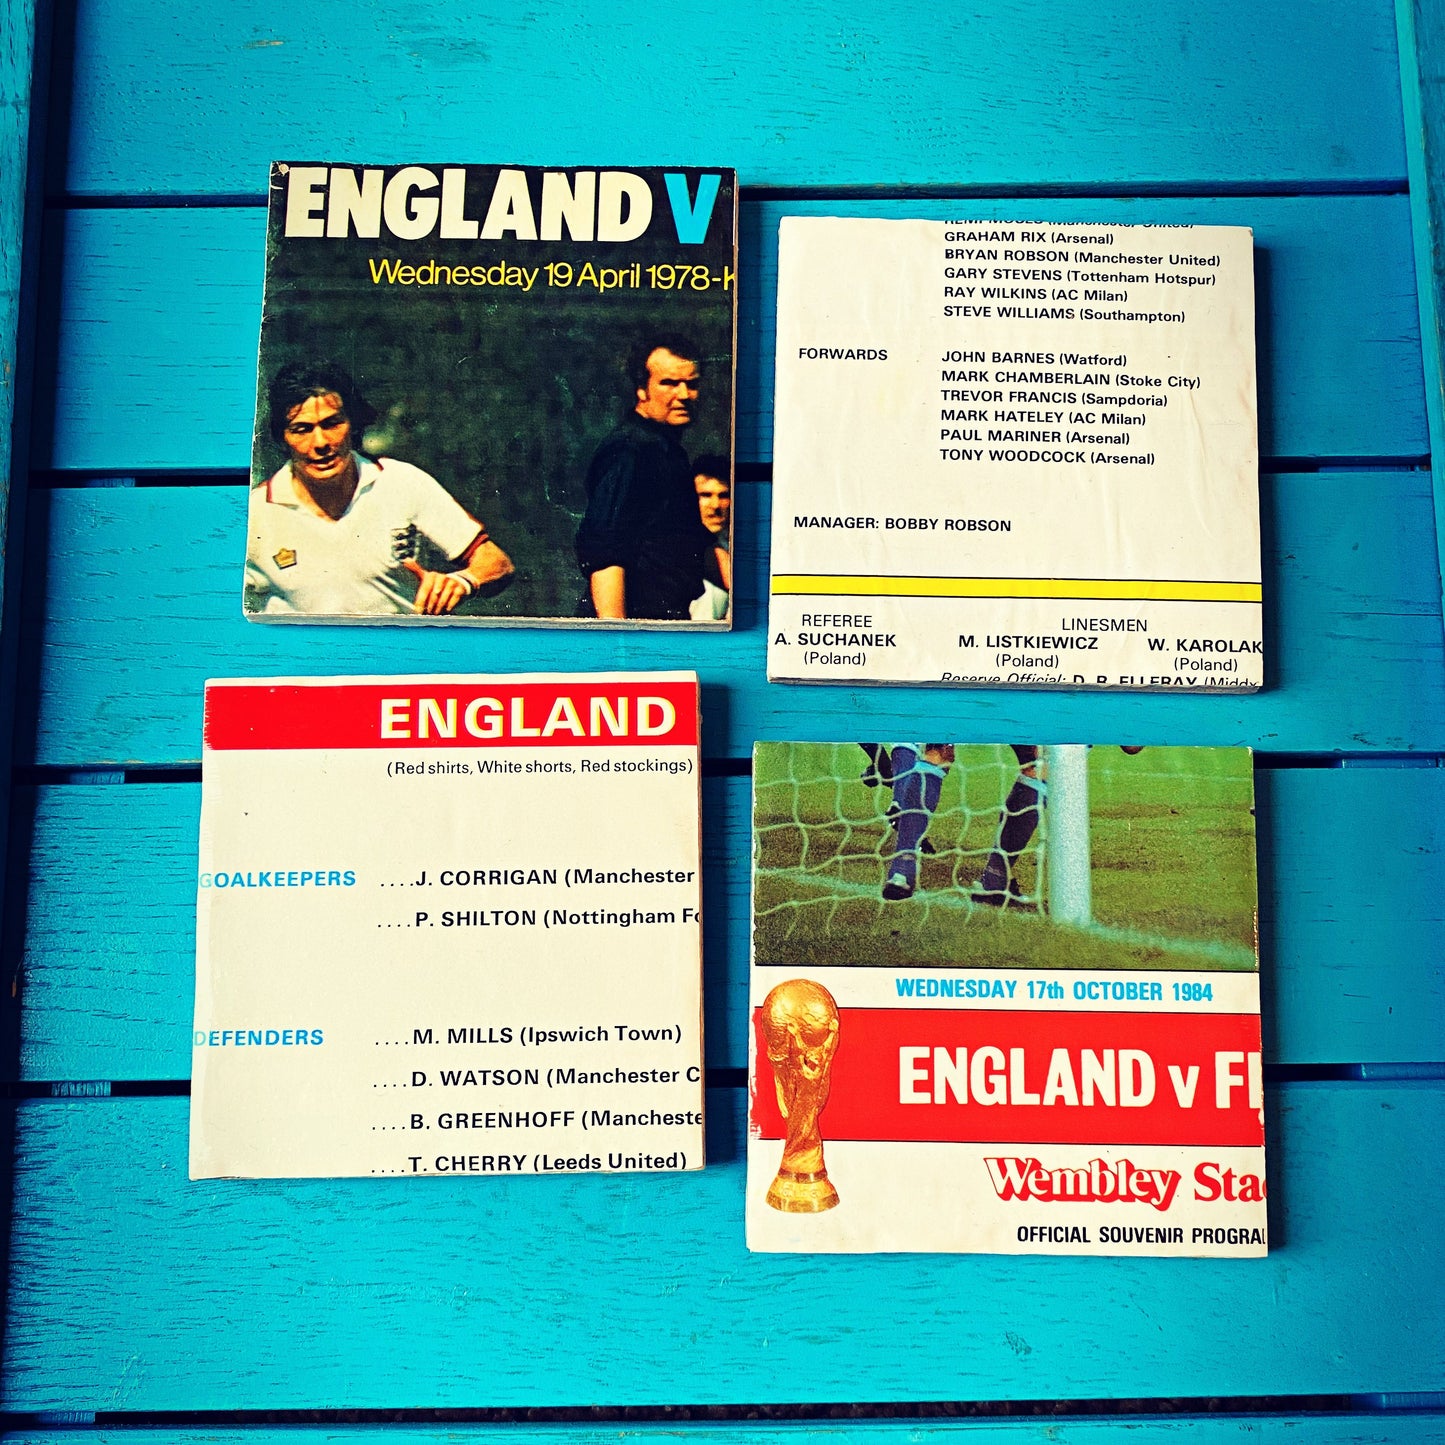 Vintage England Football Programme Coasters. Upcycled Football Gift. Man Cave Home Decor. Retro Football Gift for Dad. Wembley. Three Lions.